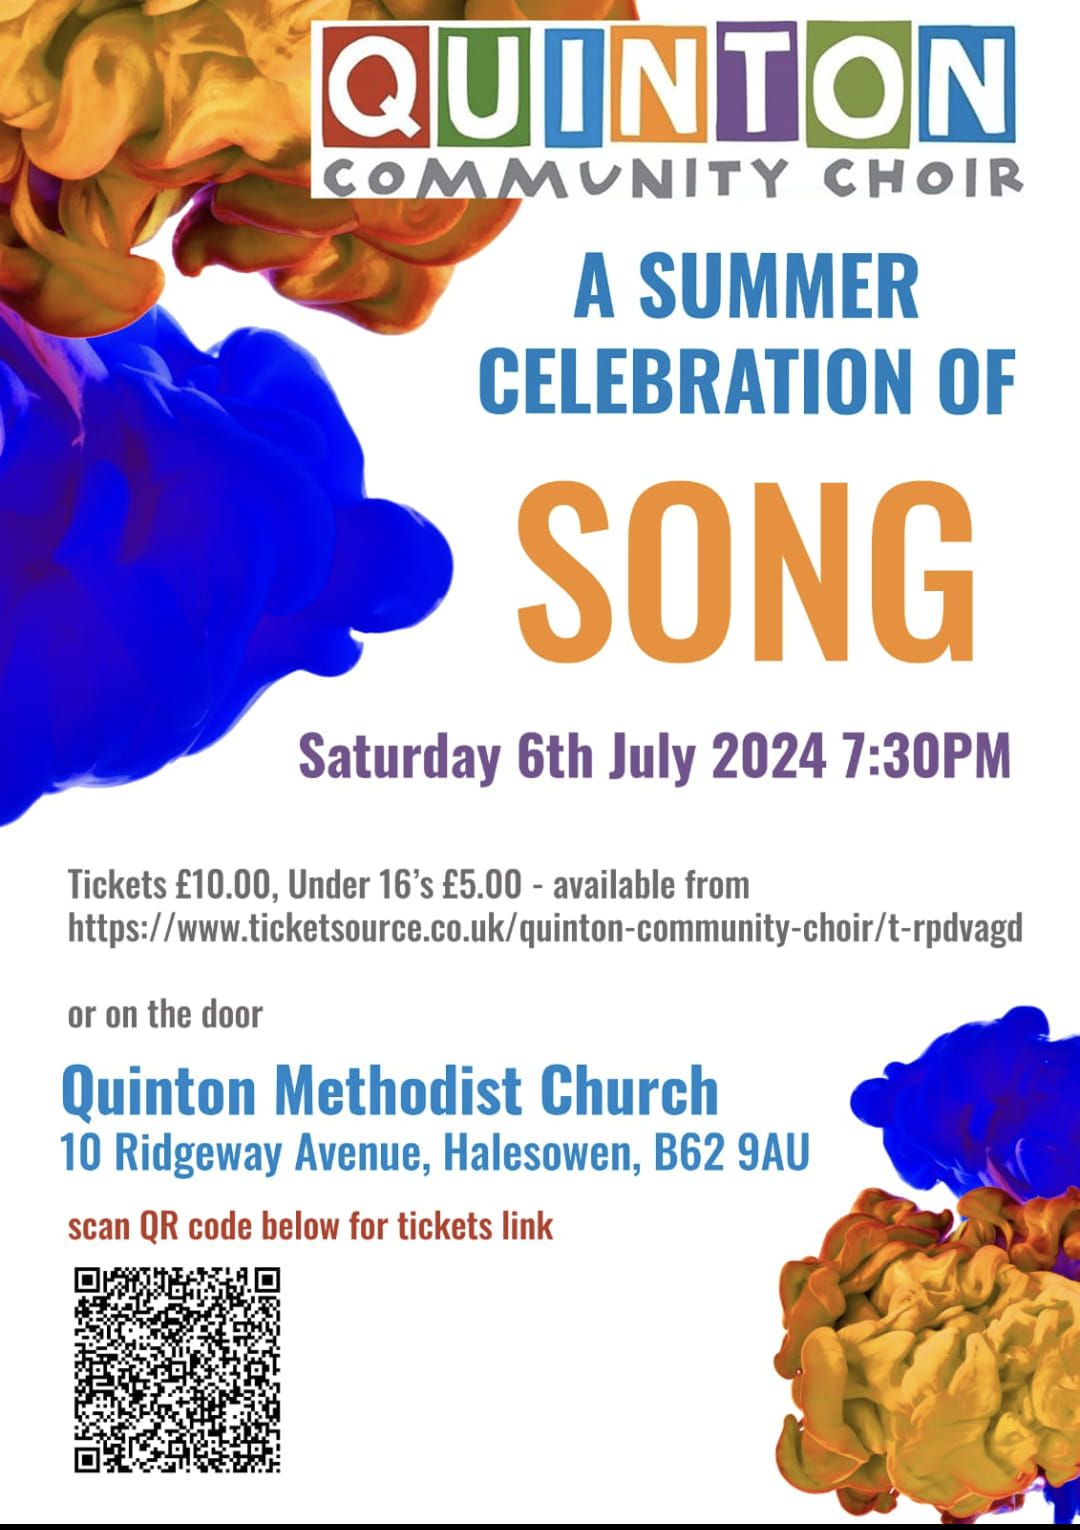 A Summer Celebration of Song